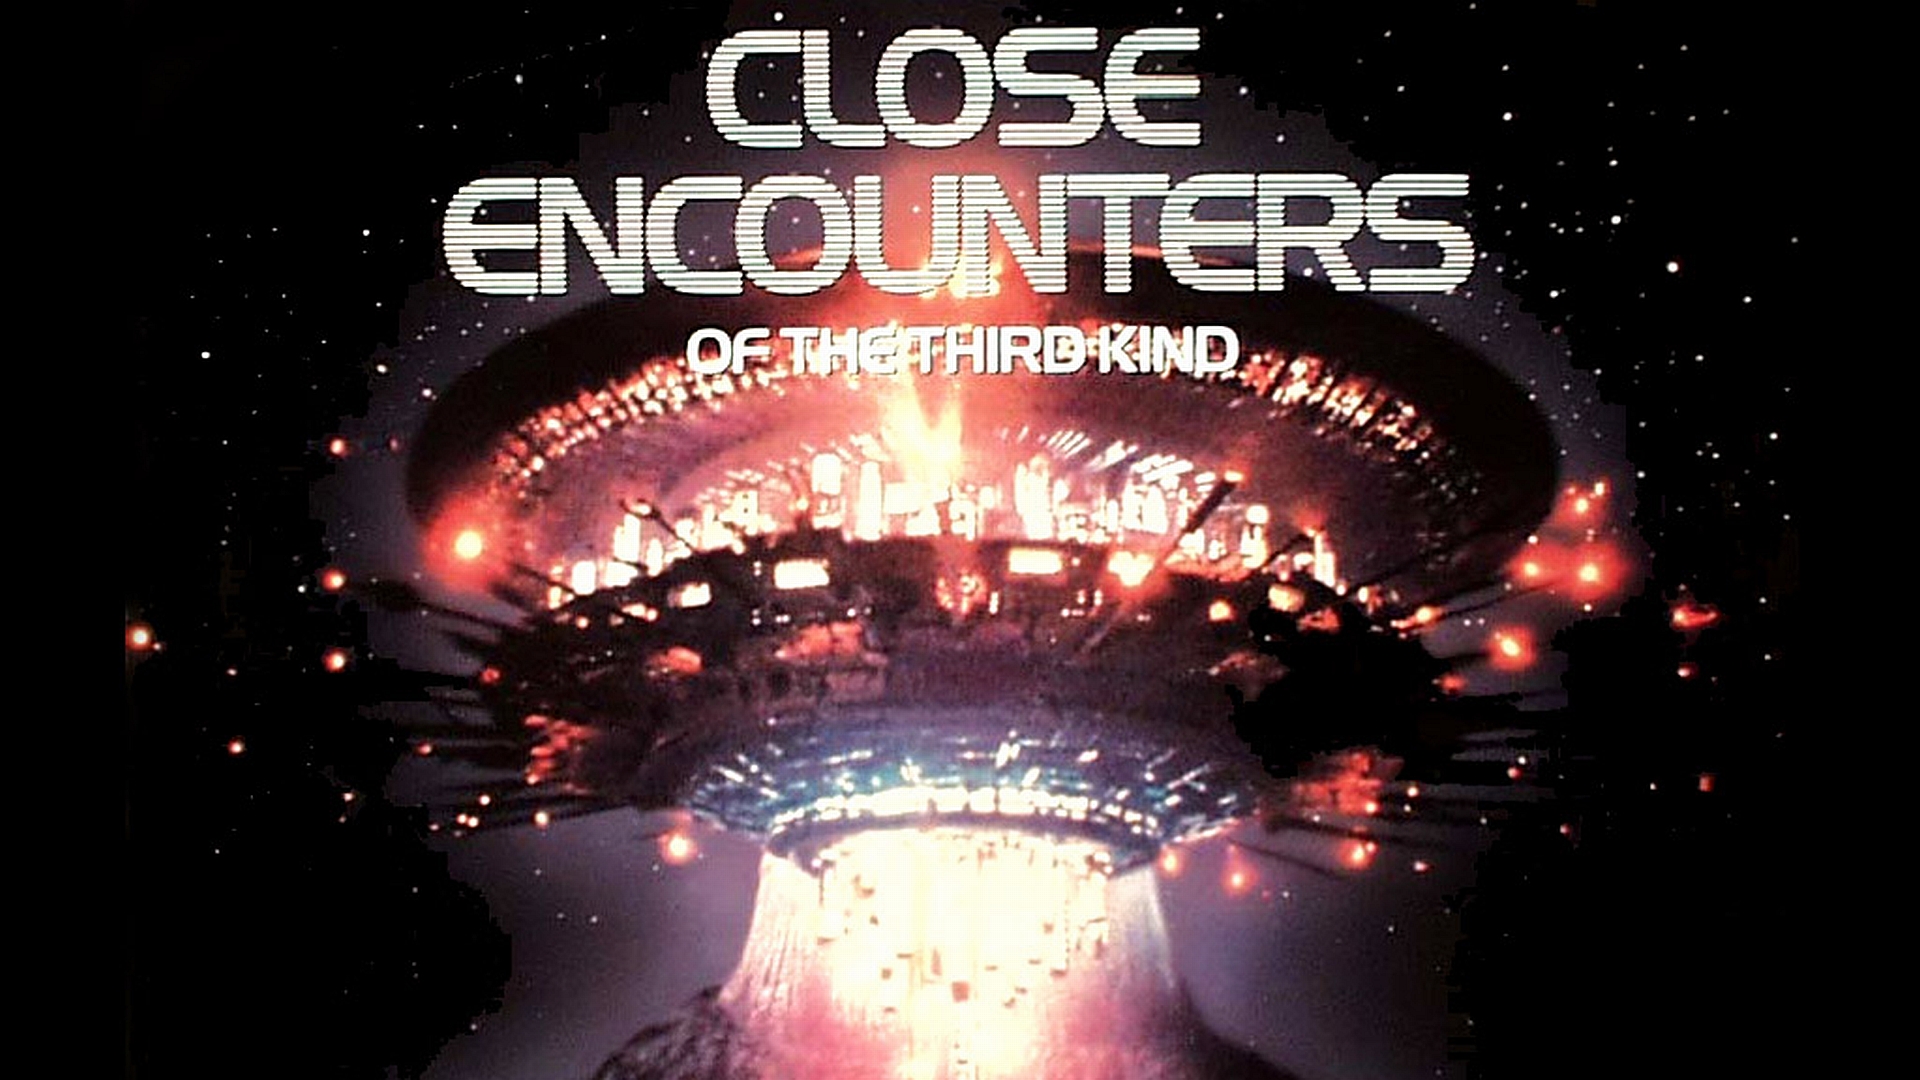 UFO Close encounters! Abductee (part1/3) - YouTube